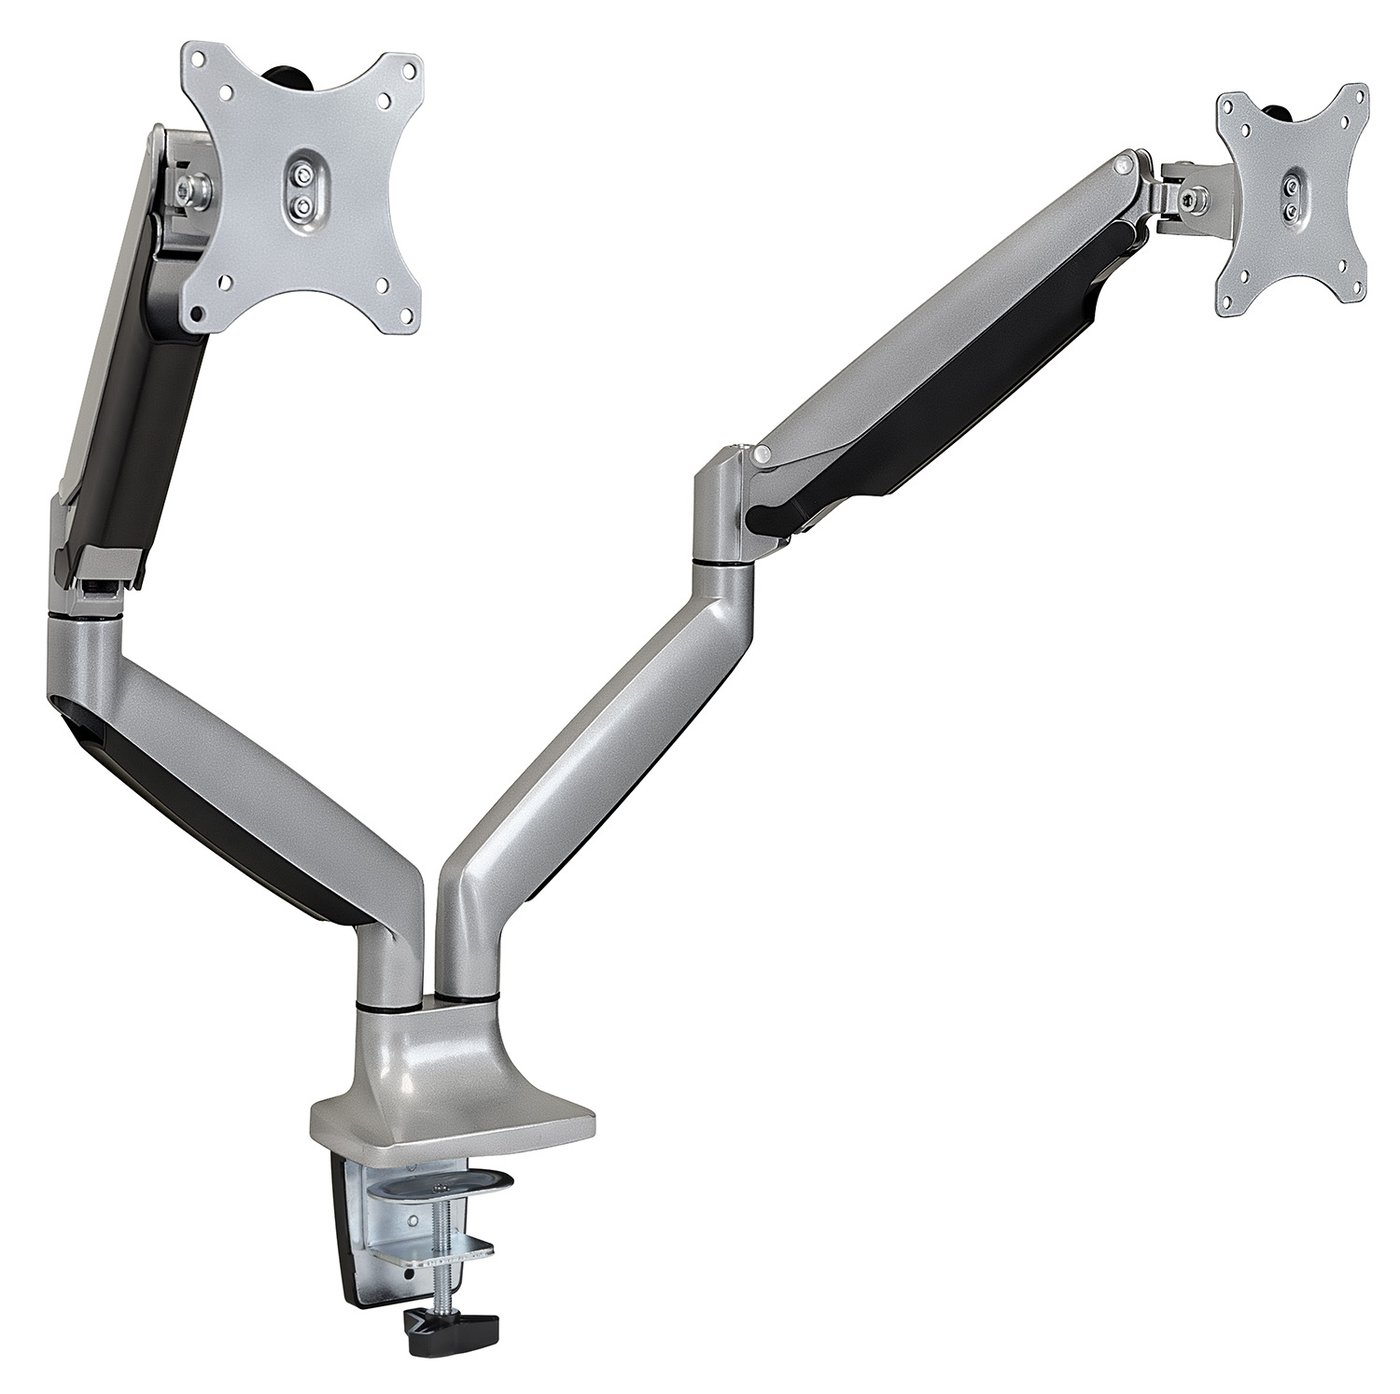 Dual Monitor Mount With Articulating Gas Spring Arm - Silver